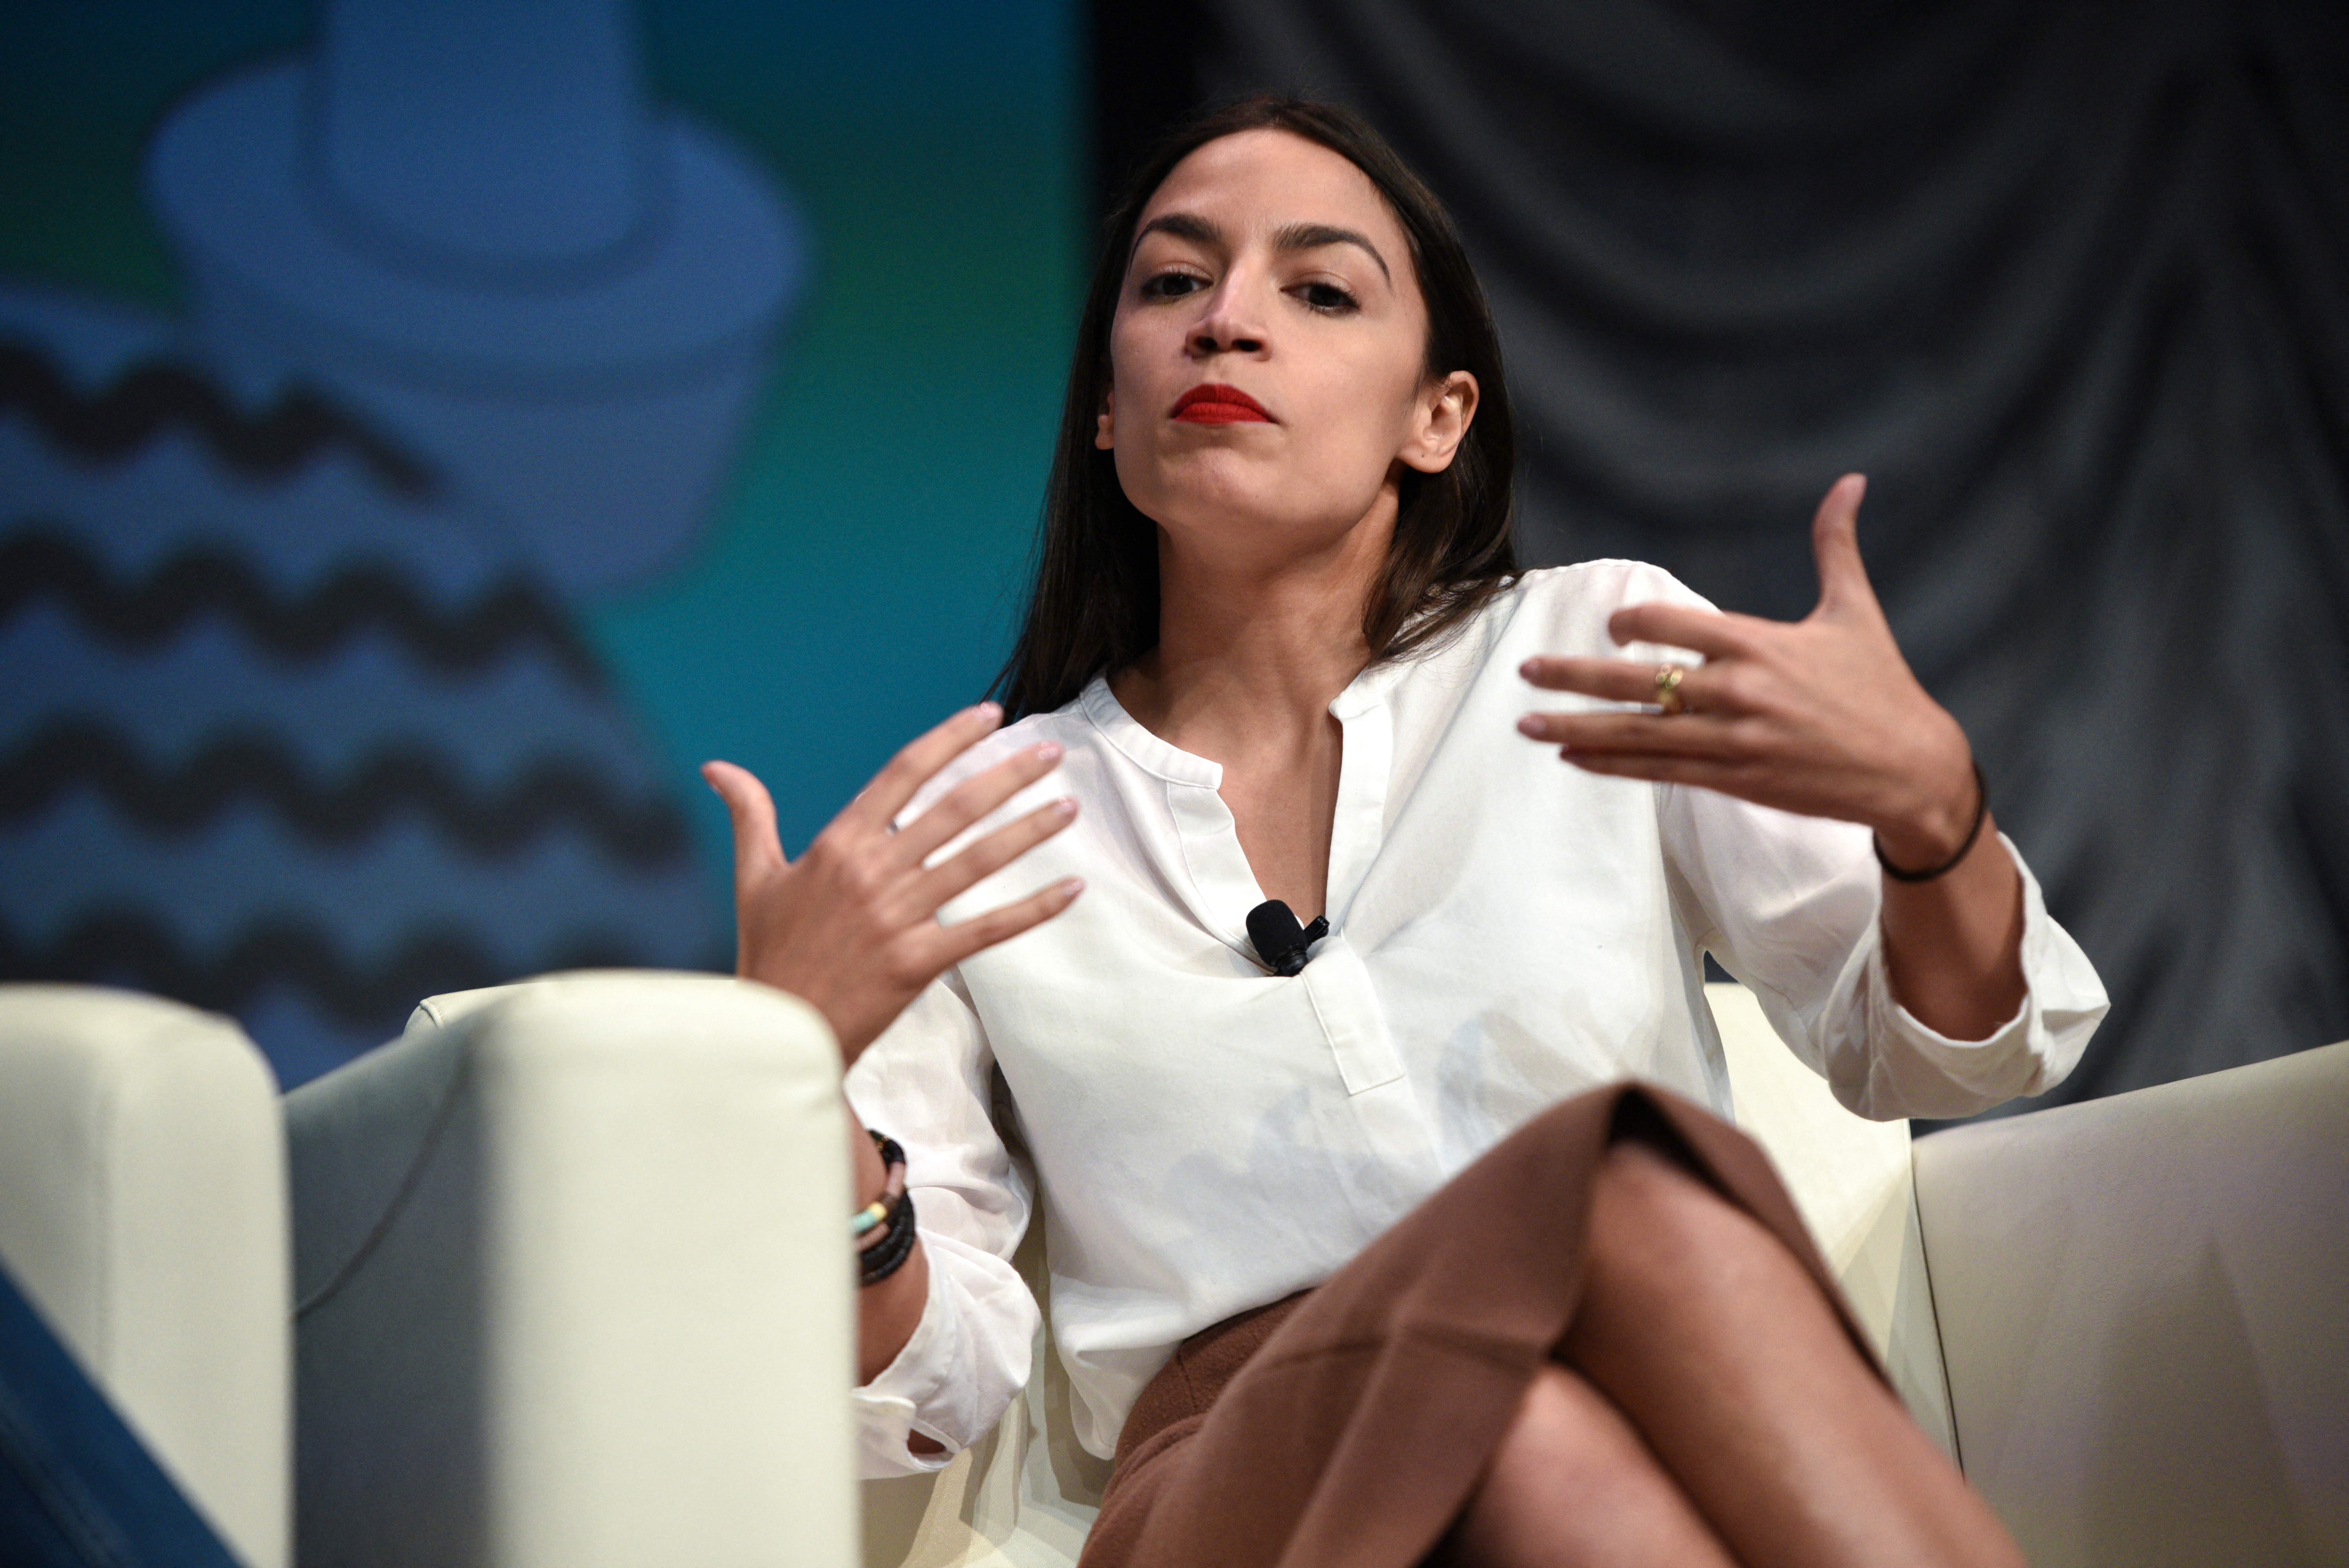 U.S. Congresswoman Alexandria Ocasio-Cortez speaks about the first few months of her tenure in congress with Briahna Gray at the South by Southwest (SXSW) conference and festivals in Austin, Texas